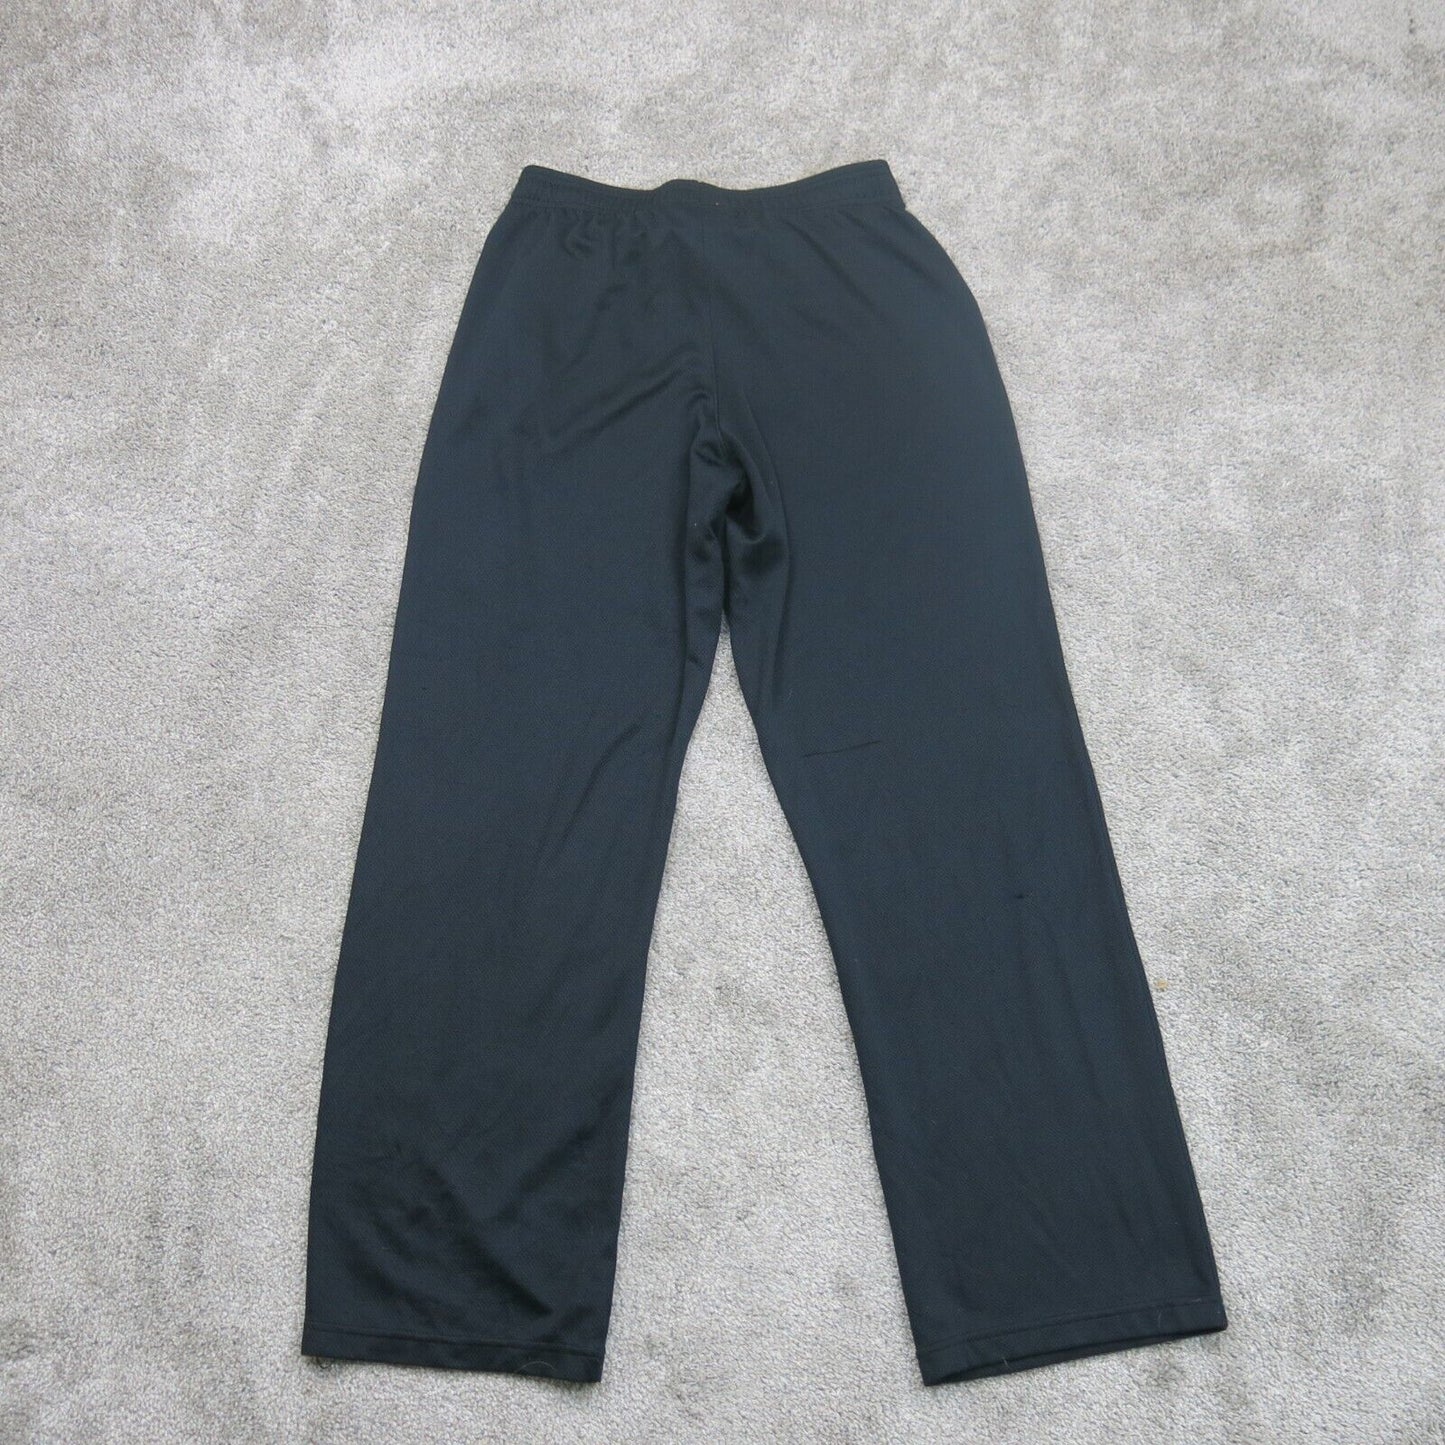 Under Armour Mens Activewear Track Pants Running Drawstring Waist Black Size MD